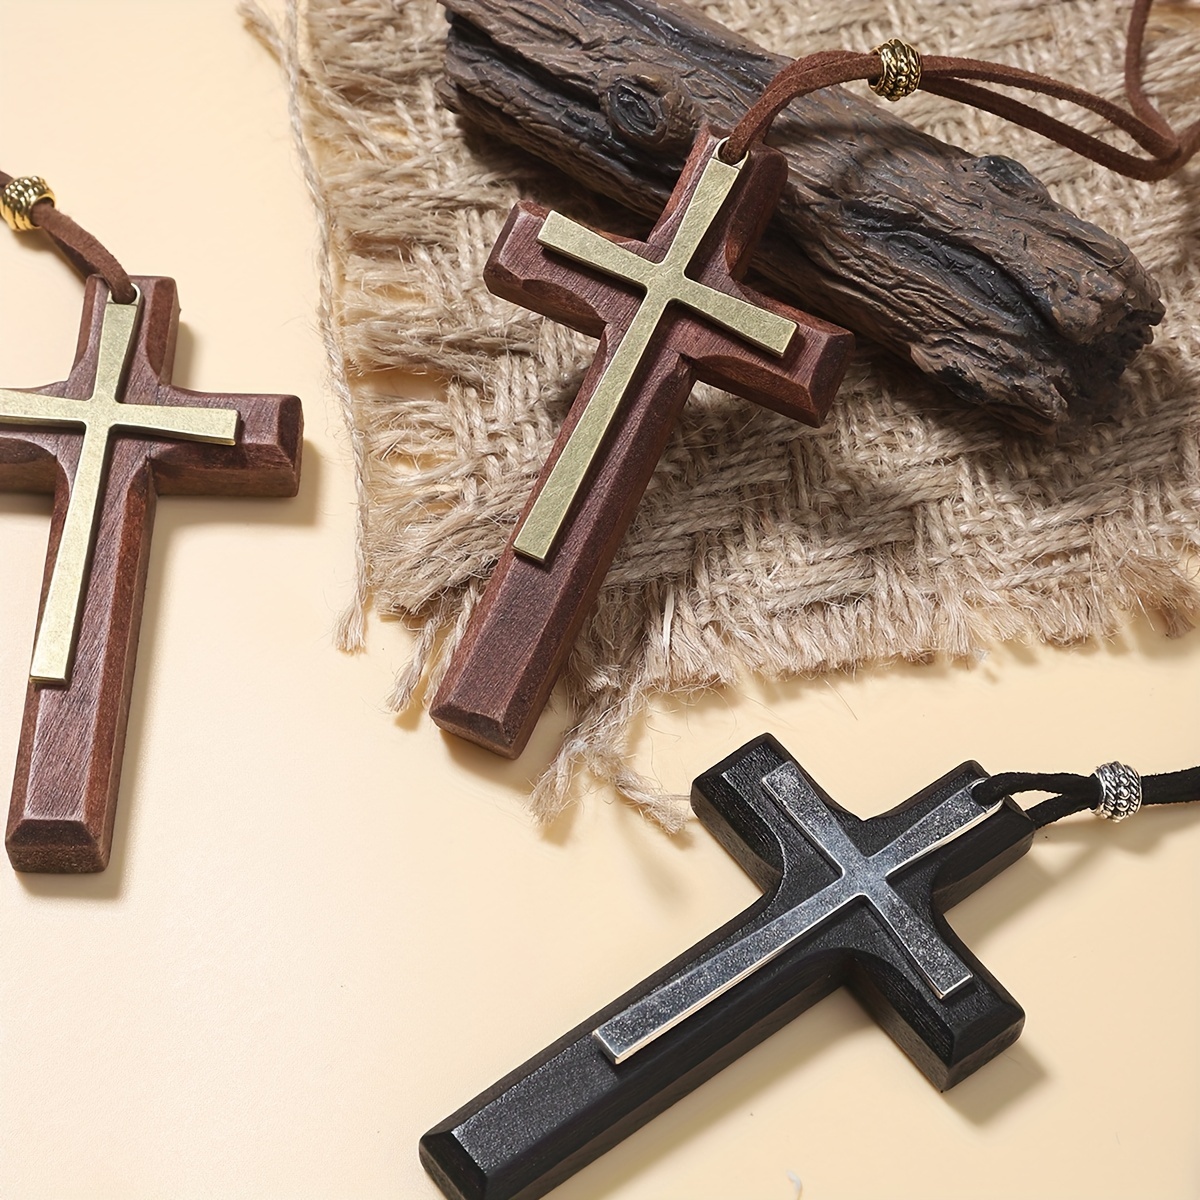 Wooden Double-Cross Necklace